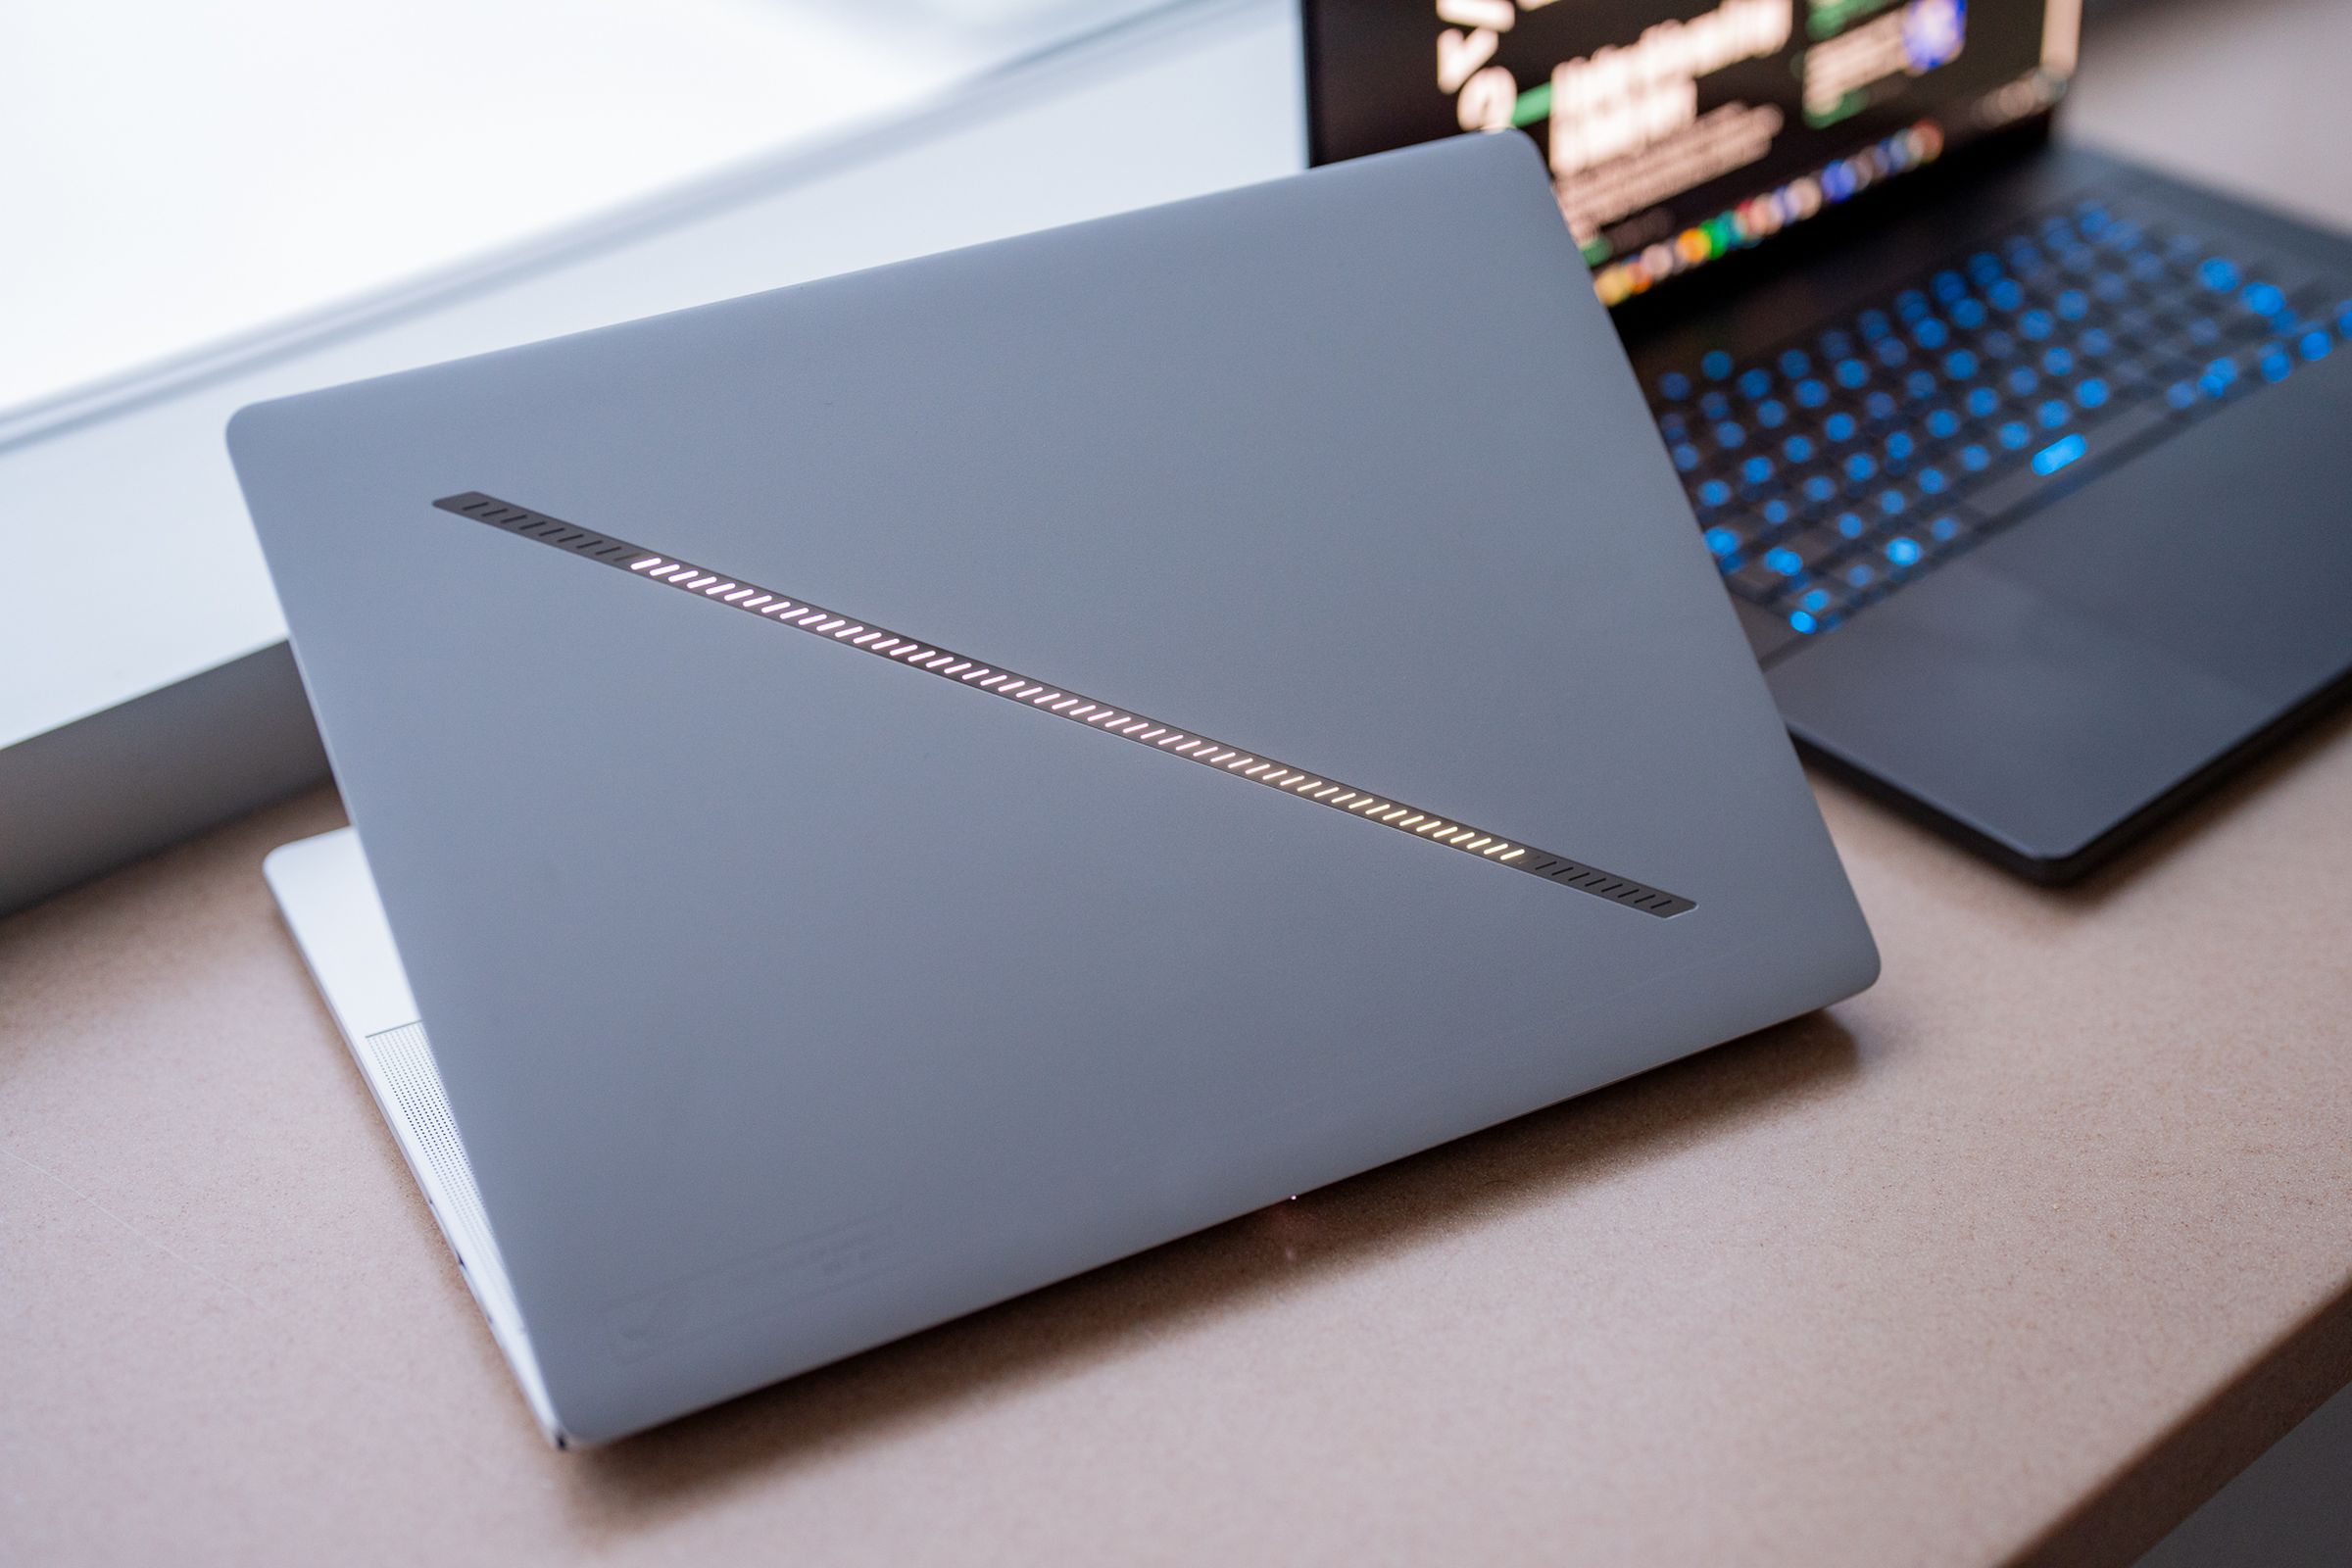 A silver laptop with a bright slash down the front. The slash has a series of RGB LEDs down the middle, but looks a little more restrained than previous ROG Zephyrus models.